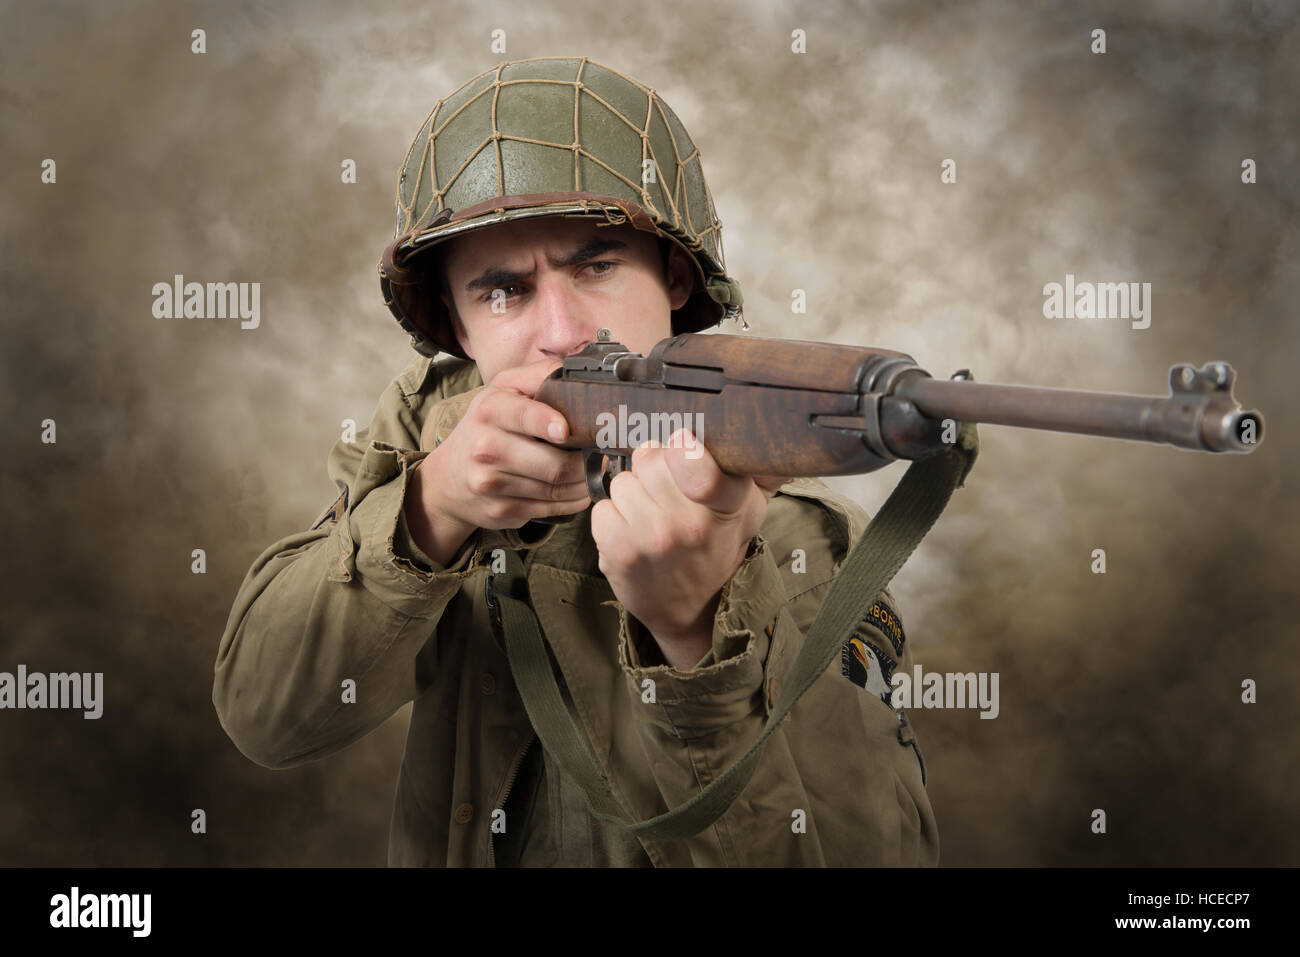 young American soldier ww2 with rifle, attack Stock Photo